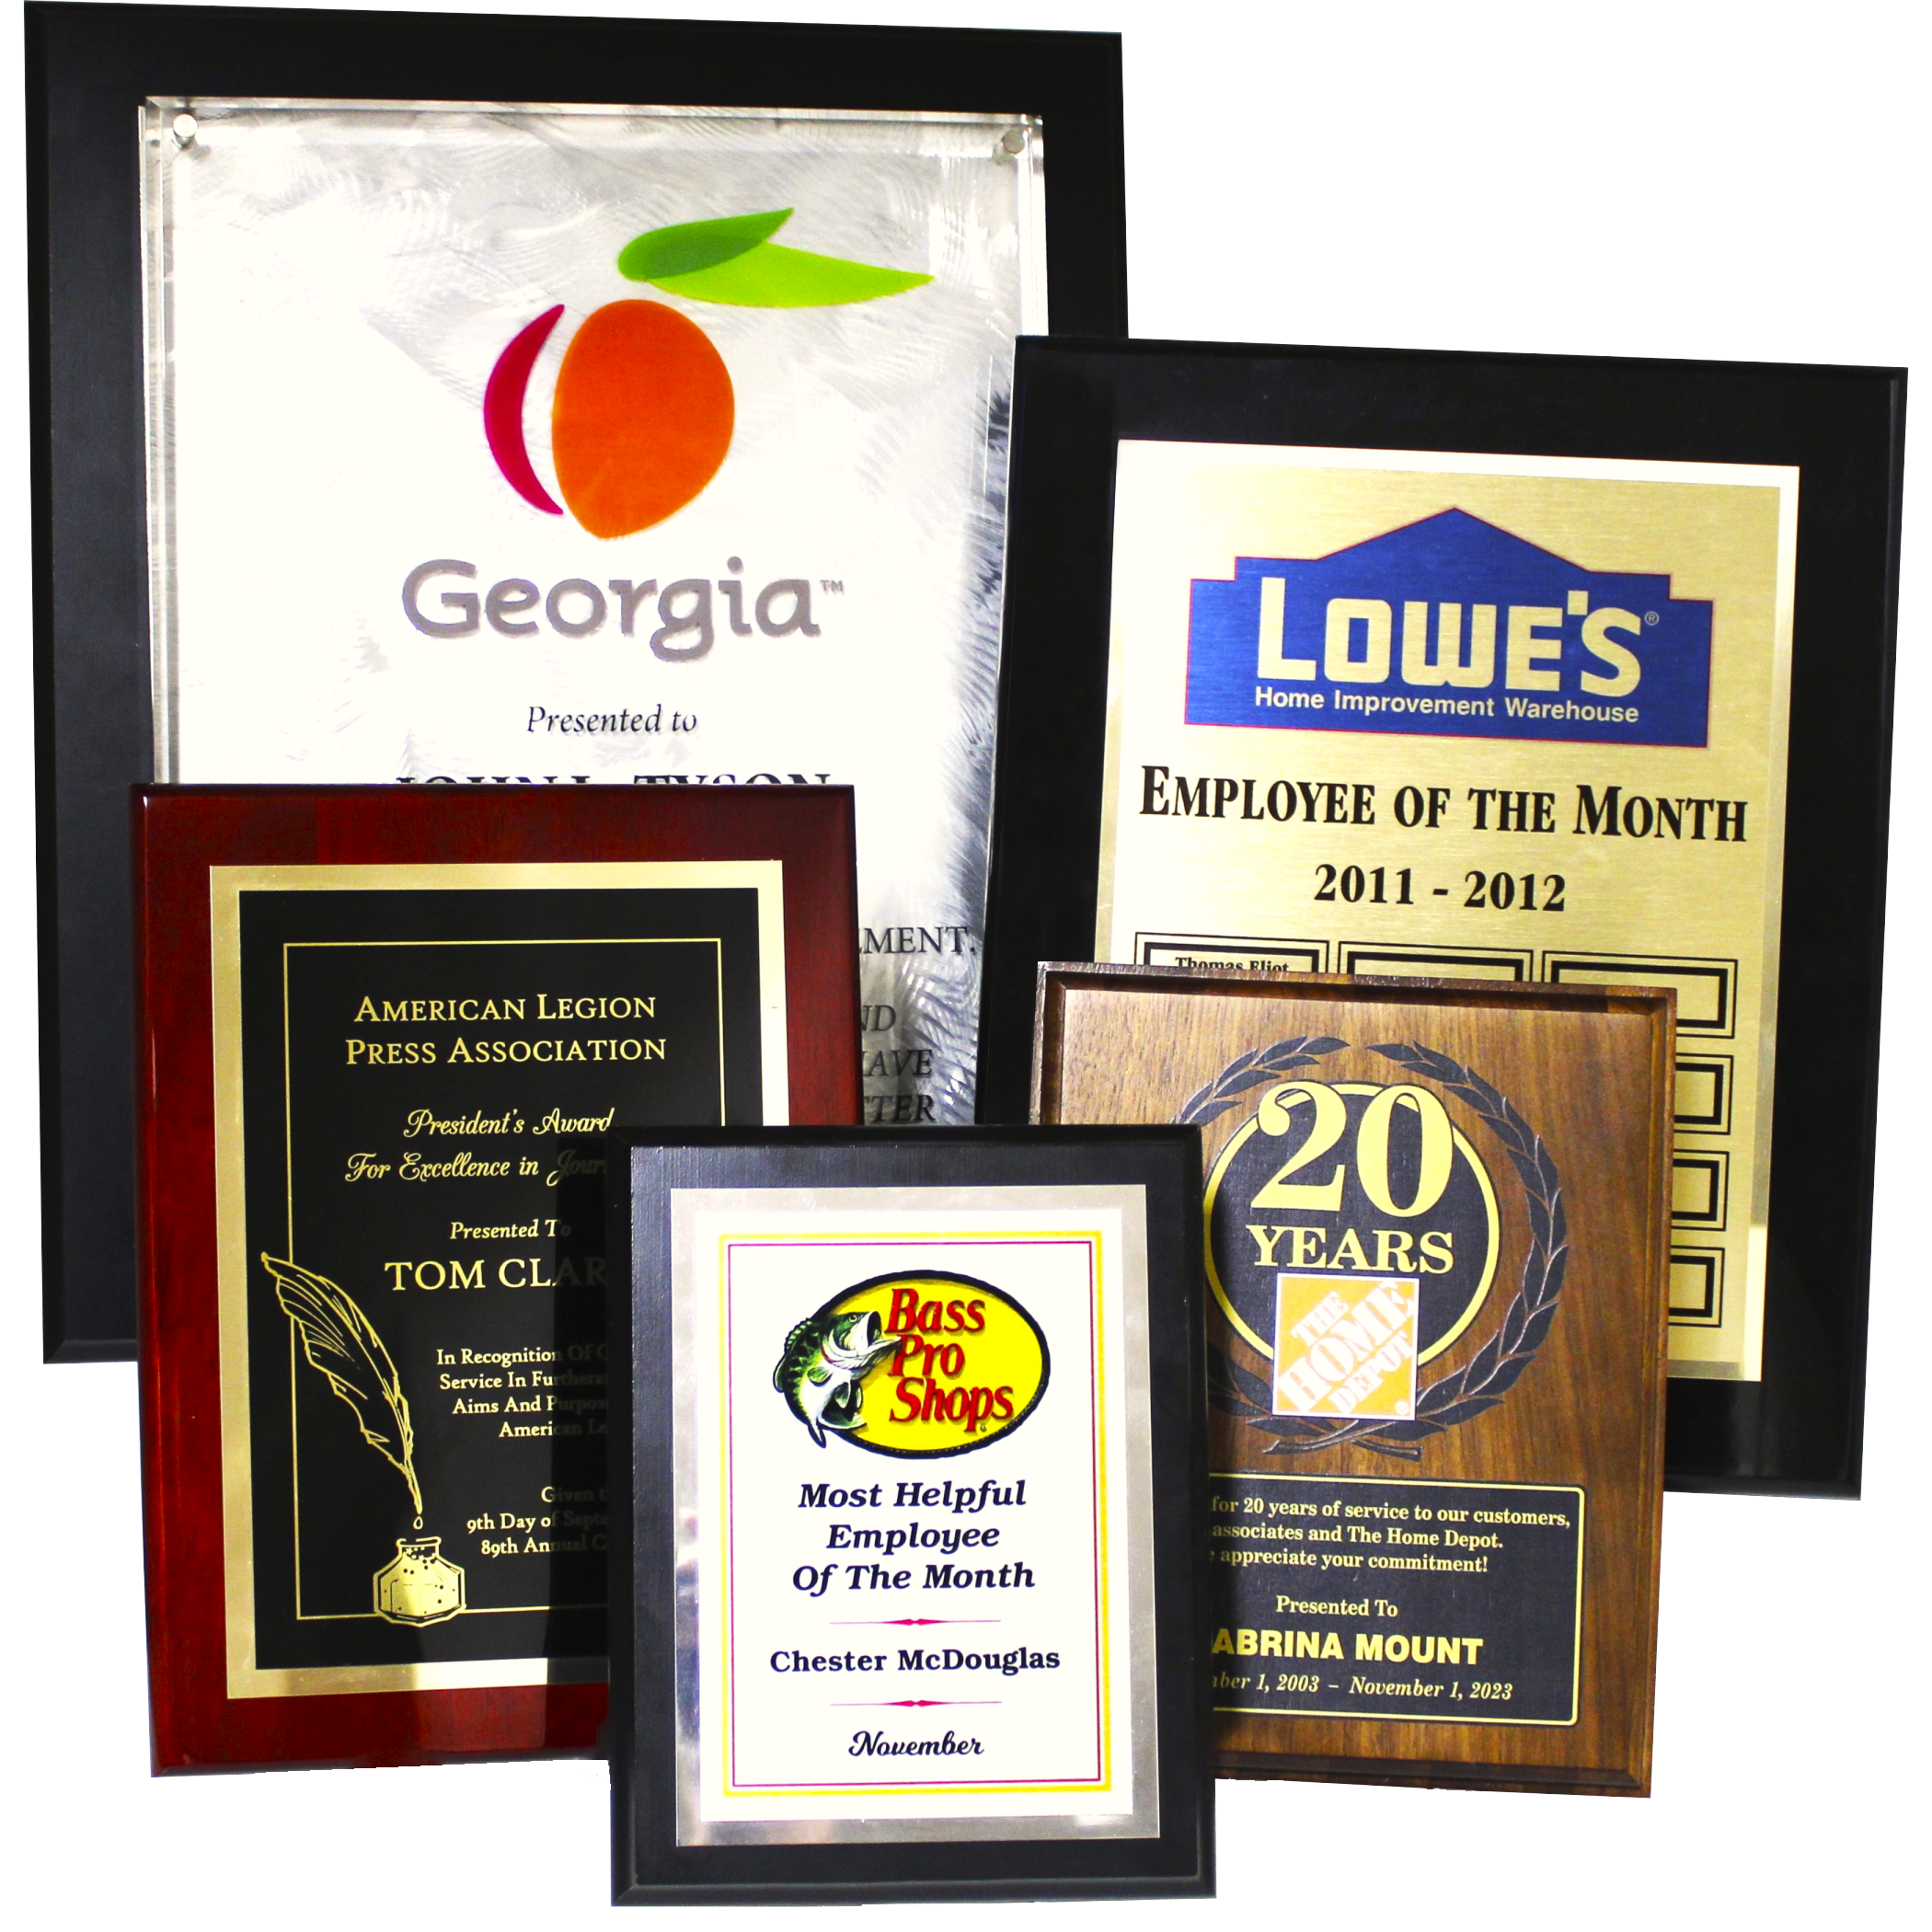 Celebrate achievements in style with our exquisite plaque awards from Specialty Engraving in Atlanta. Perfect for every occasion.